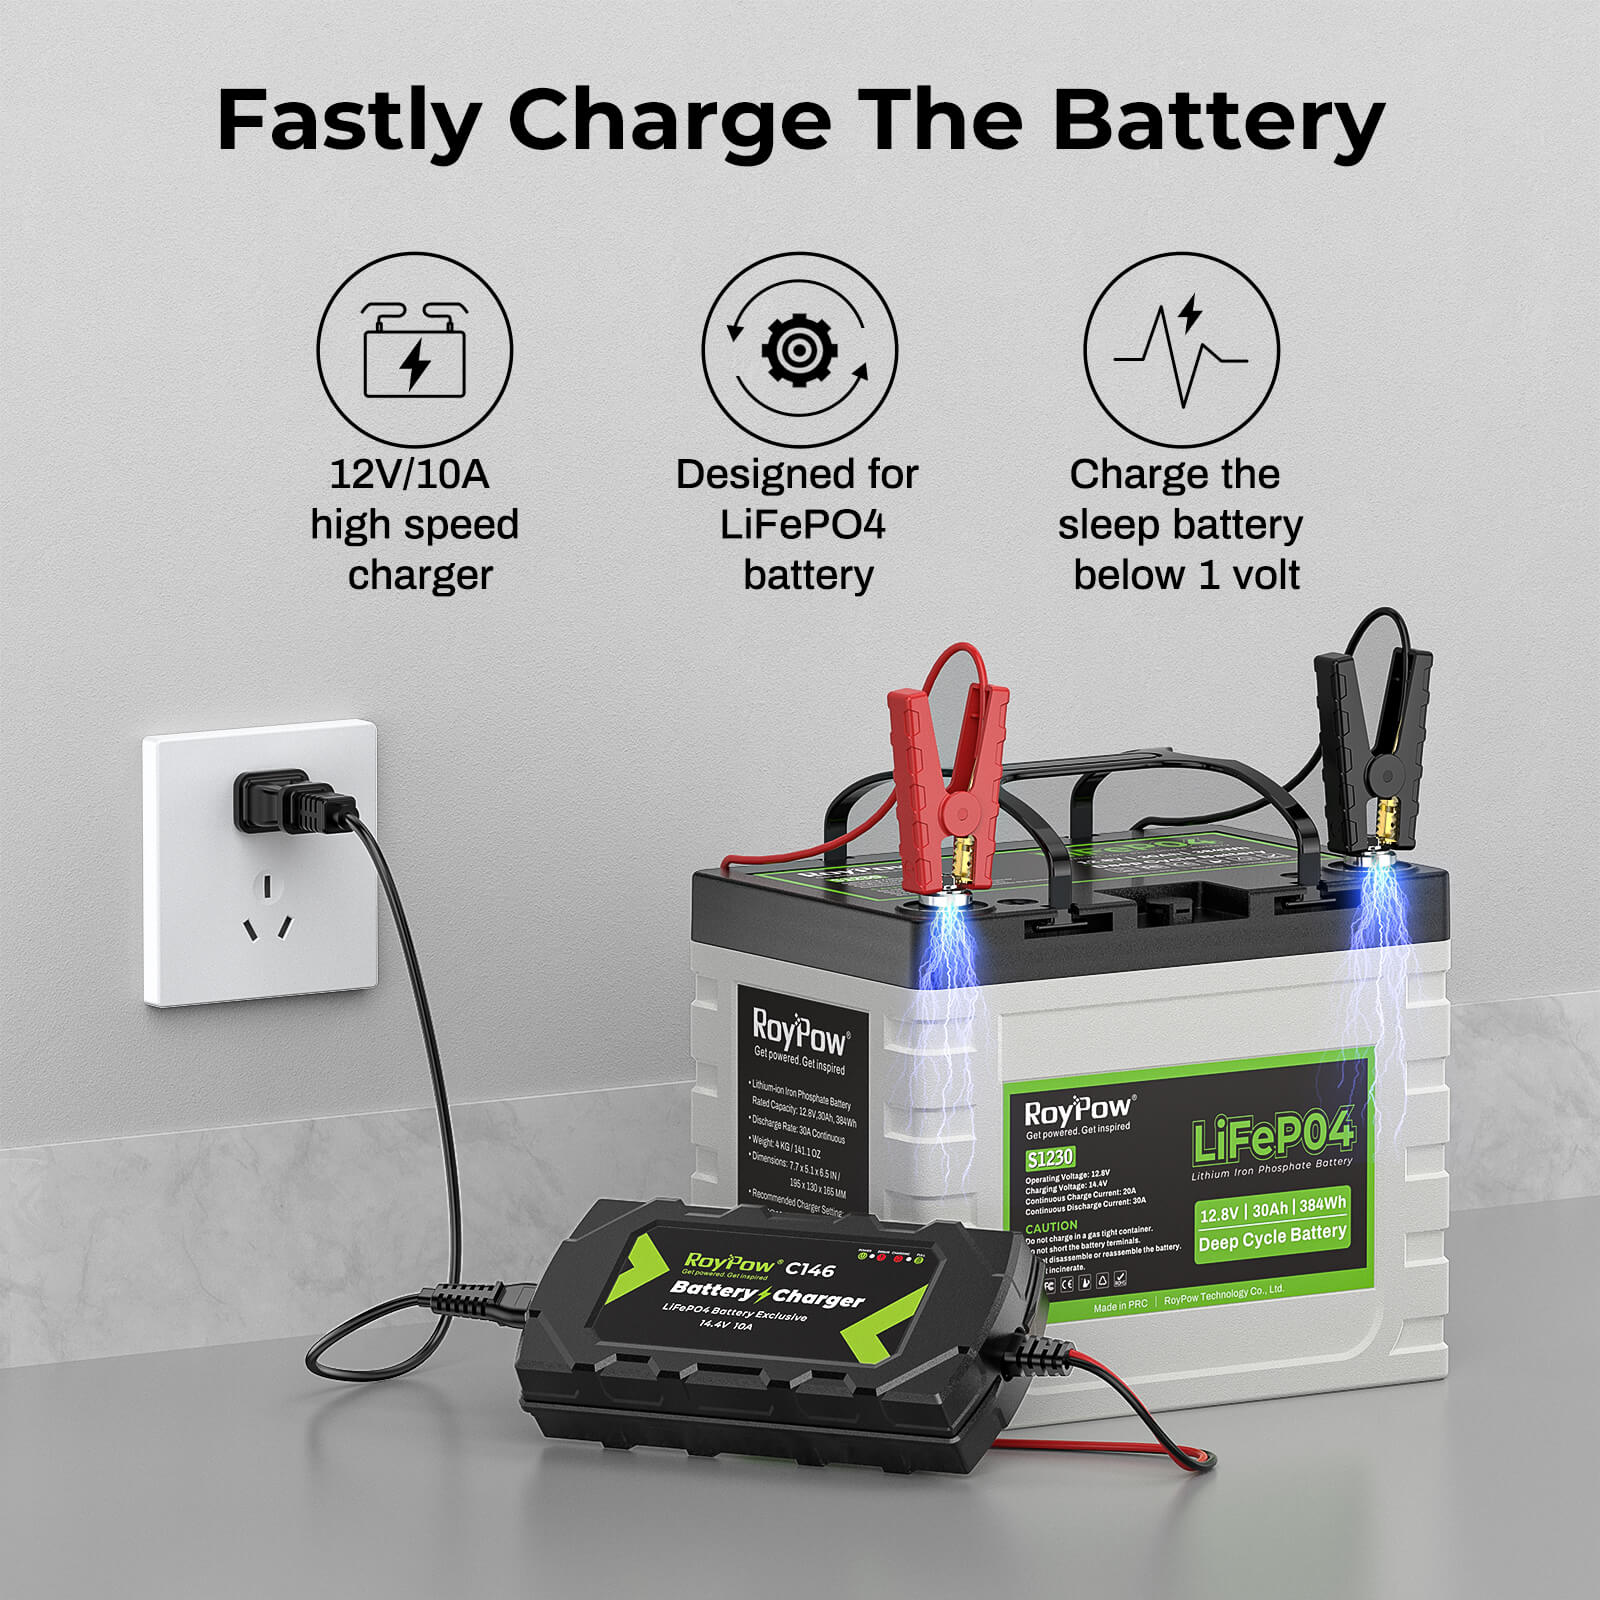 RoyPow 14.4V-10A C146B LiFePO4 Battery charger